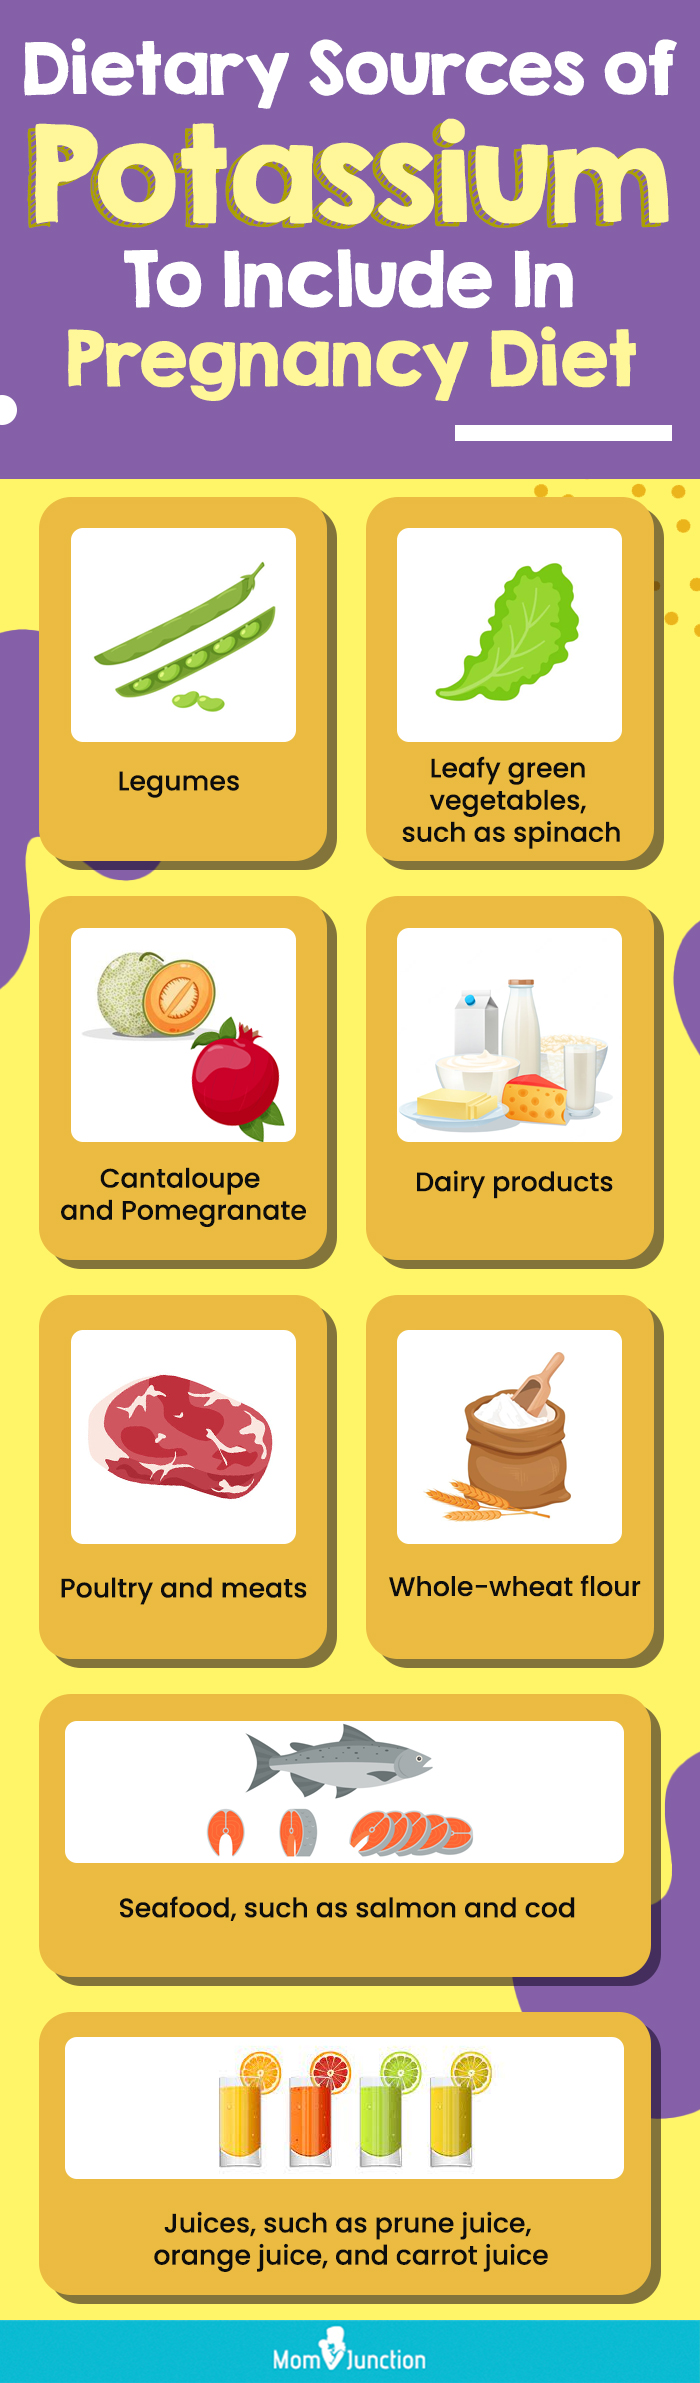 dietary sources of potassium to include in pregnancy diet (infographic)